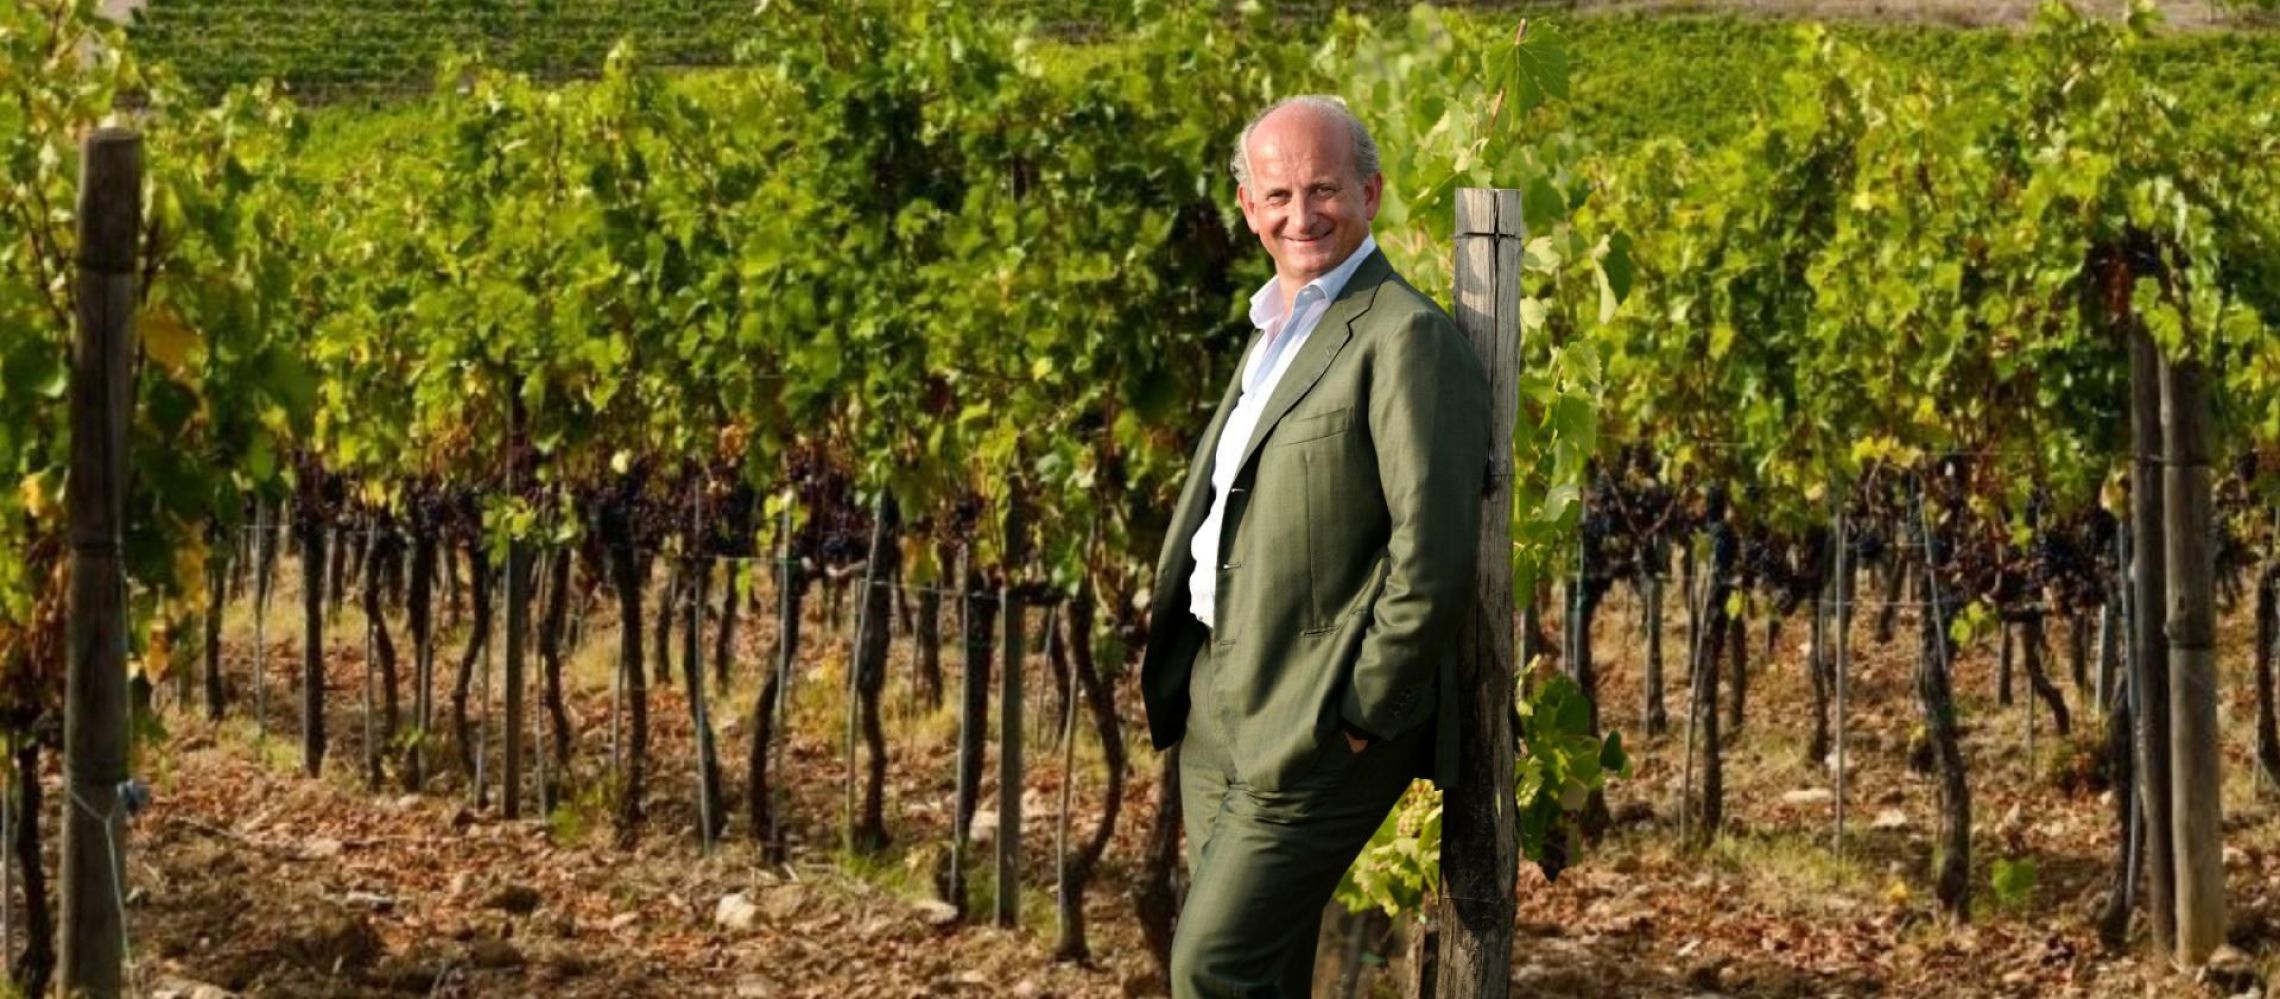 Photo for: A Taste of Italy: Lamberto Frescobaldi's Leadership at the UIV